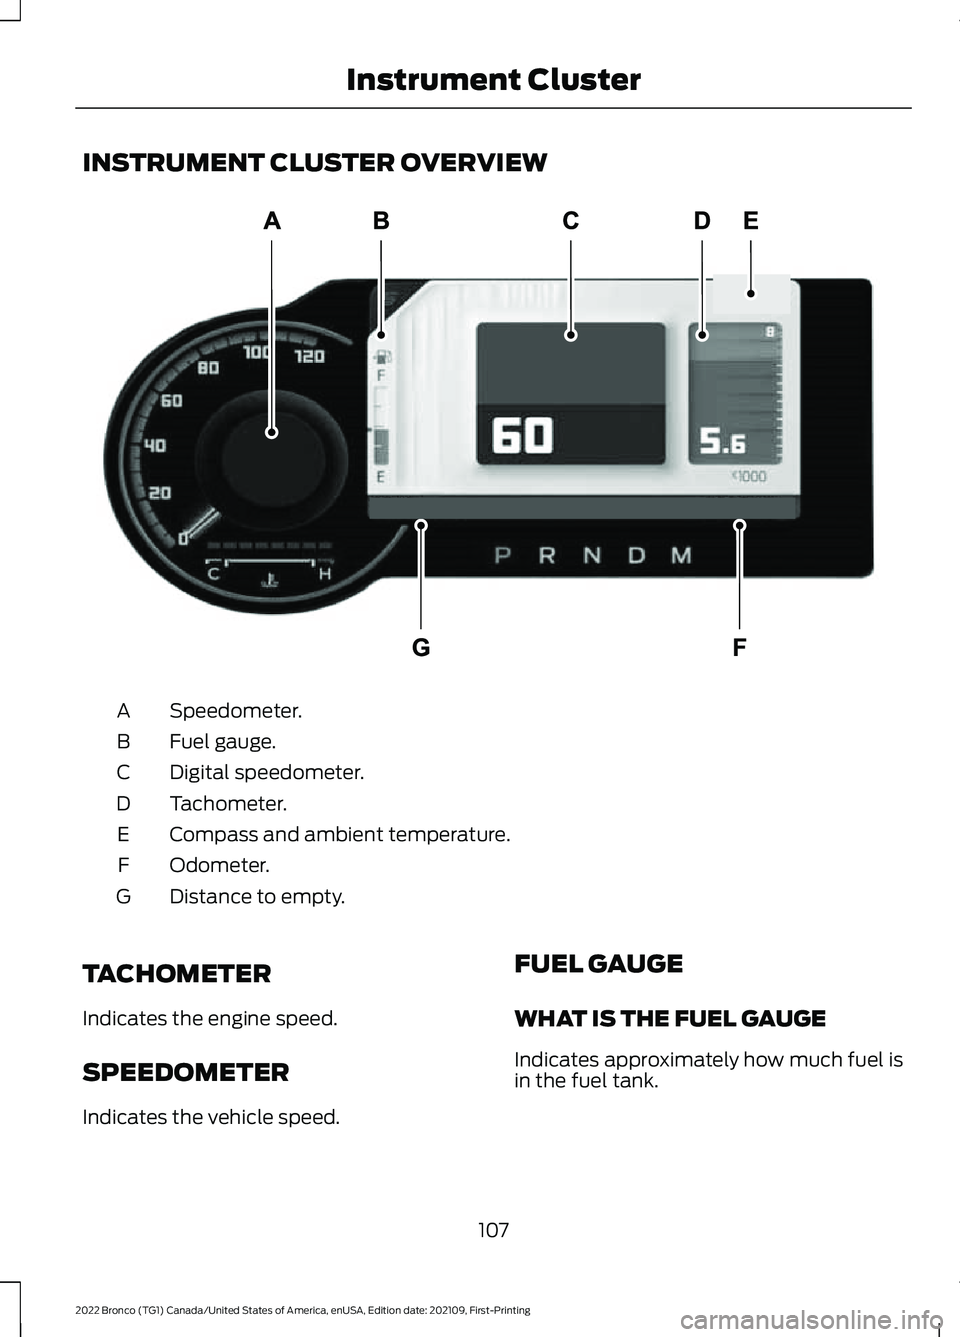 FORD BRONCO 2022  Owners Manual INSTRUMENT CLUSTER OVERVIEW
Speedometer.A
Fuel gauge.B
Digital speedometer.C
Tachometer.D
Compass and ambient temperature.E
Odometer.F
Distance to empty.G
TACHOMETER
Indicates the engine speed.
SPEEDO